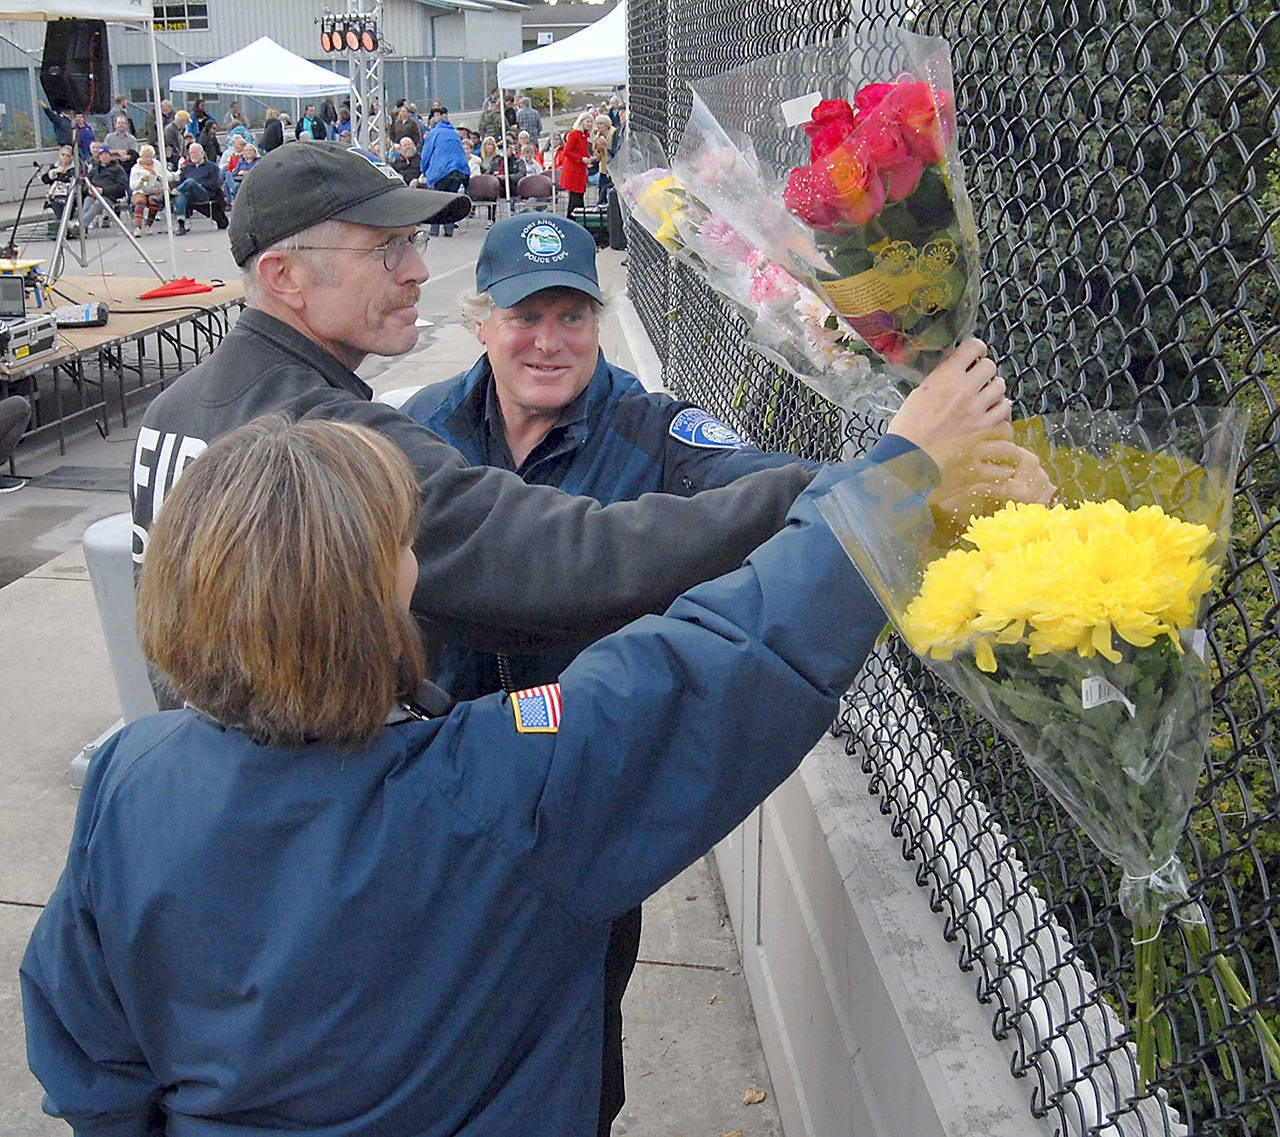 Port Angeles police volunteers Pam Ogier, left, and Darrel Reetz, right, along with Clallam County Fire District No. 2 Lt. Al Oman, center, place a bouquet of eight roses on suicide barriers on the Eighth Street bridge over Valley Creek in honor of the eight people who leapt to their deaths since 2009. The completion of fencing installation was celebrated during a community gathering and concert Wednesday evening in Port Angeles. (Keith Thorpe/Peninsula Daily News)